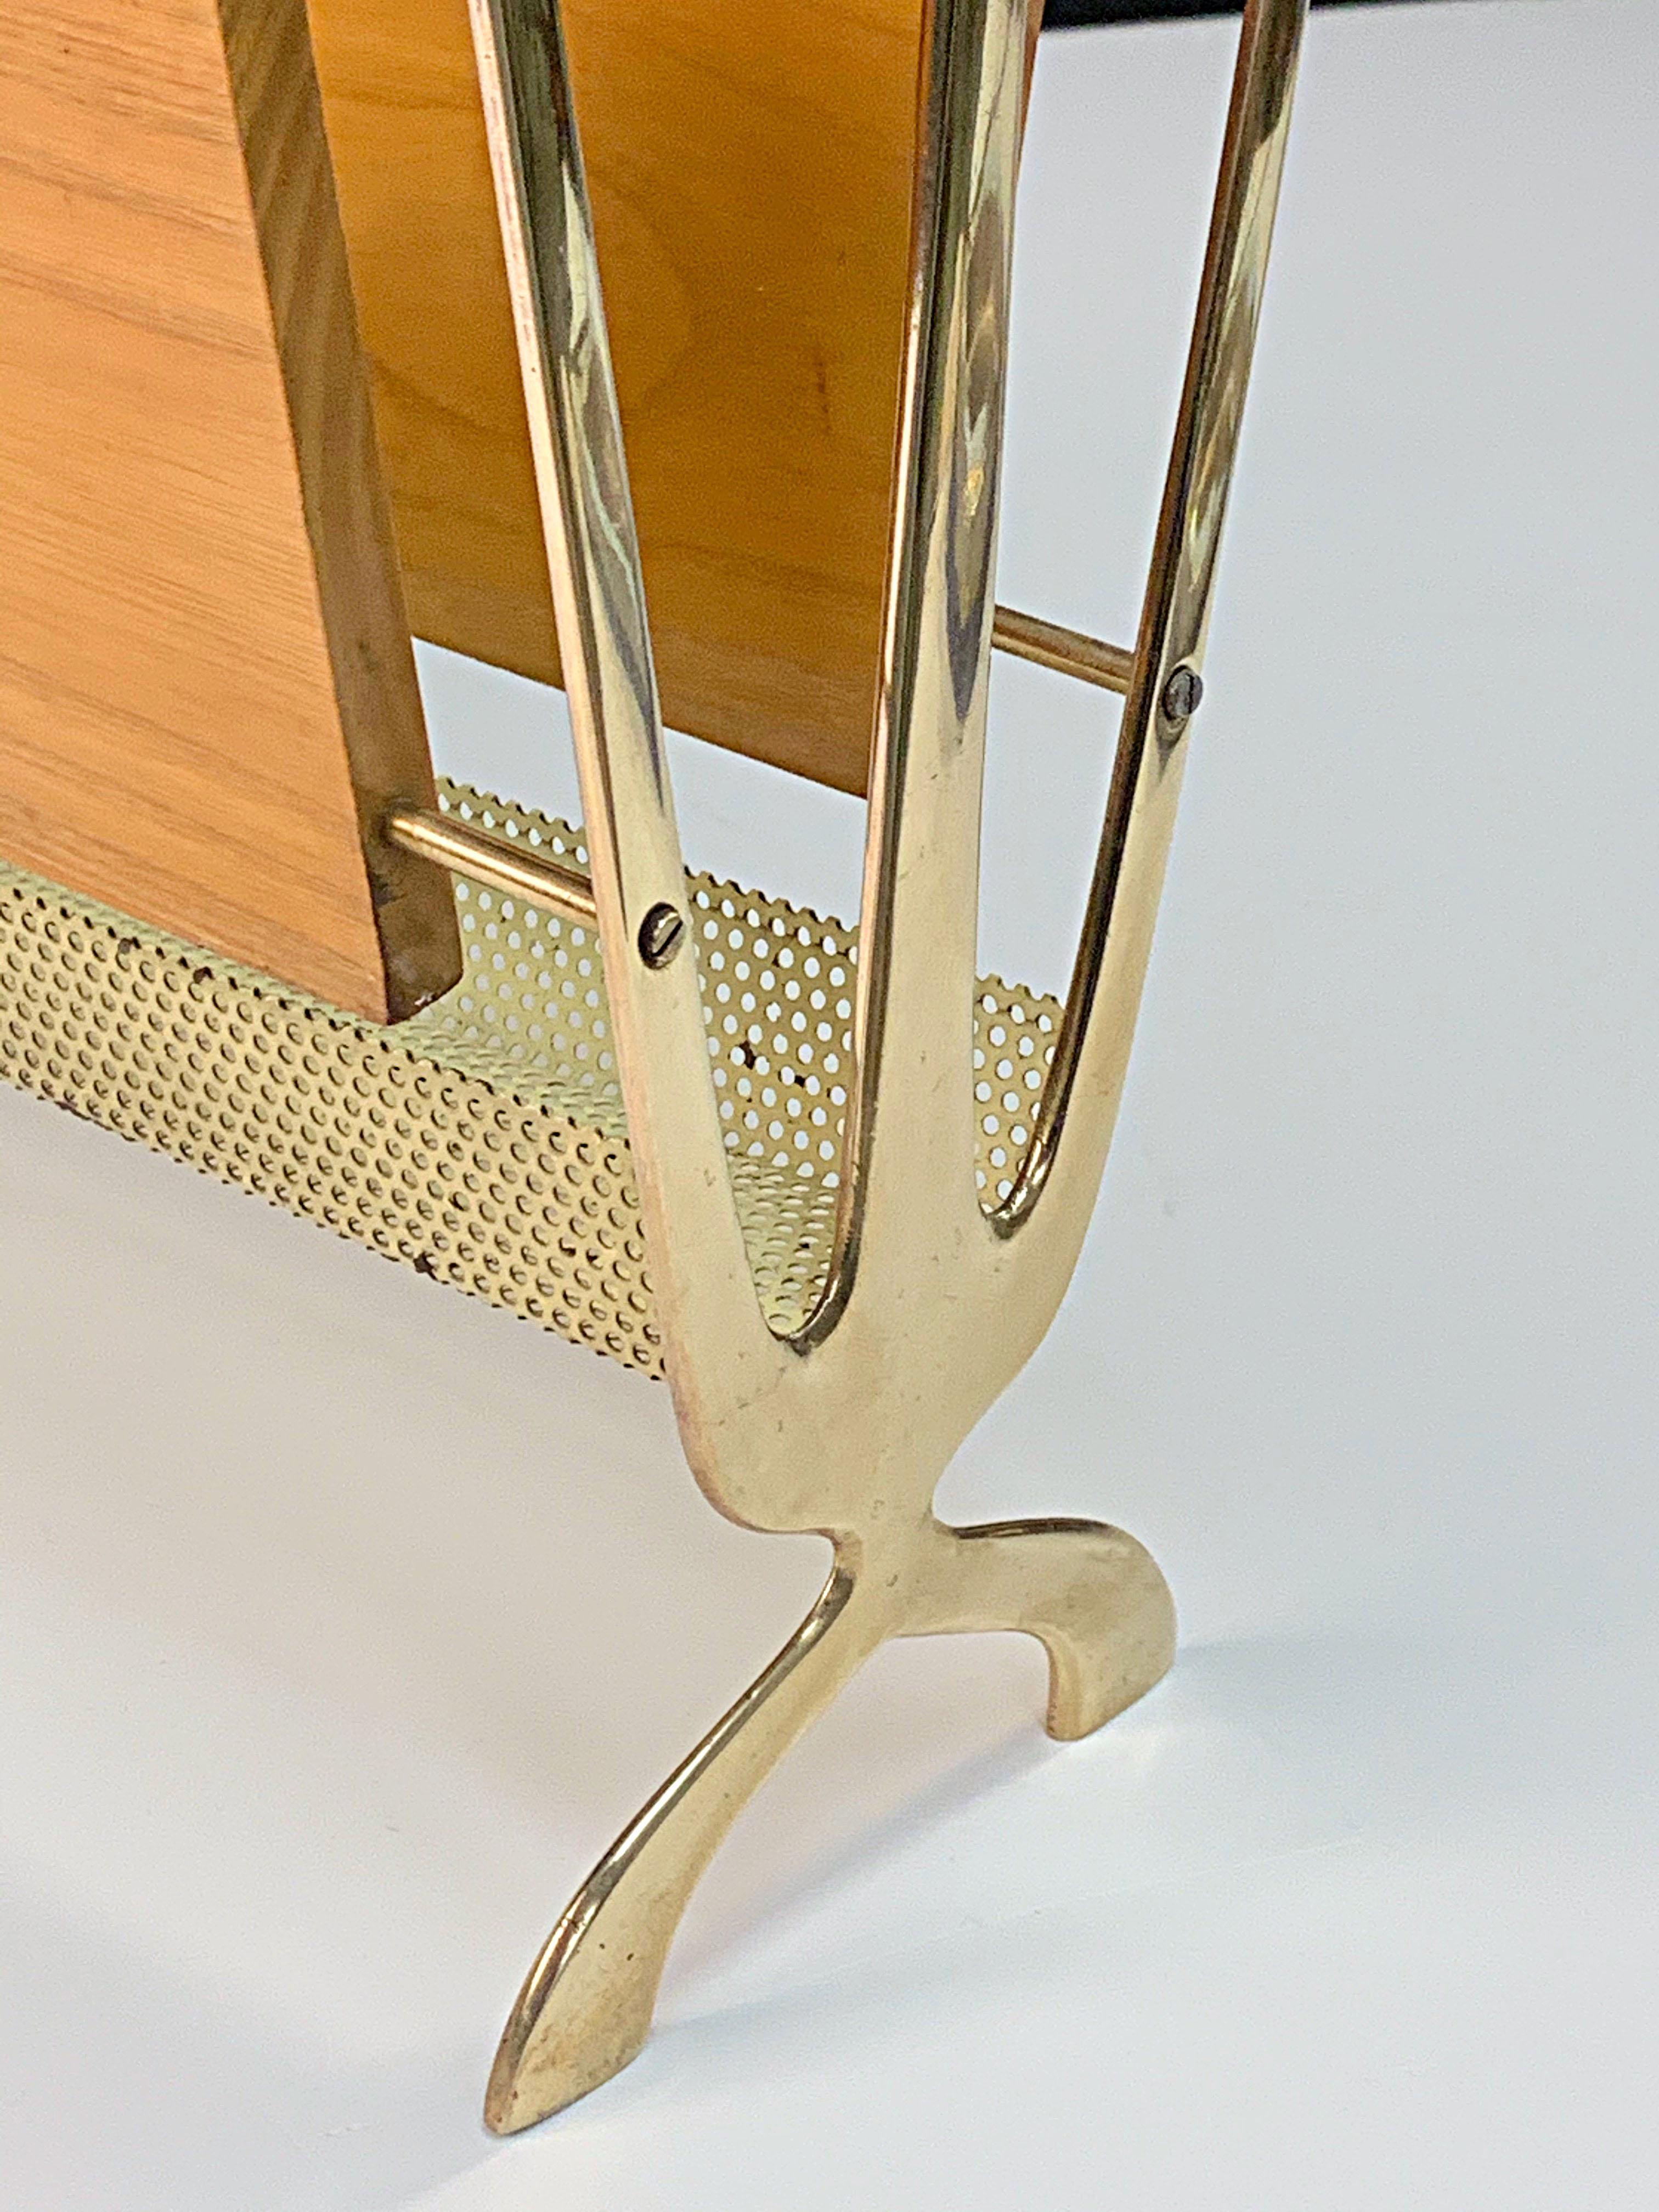 Maison Baguès Midcentury Brass and Chestnut Wood French Magazine Rack, 1950s For Sale 13